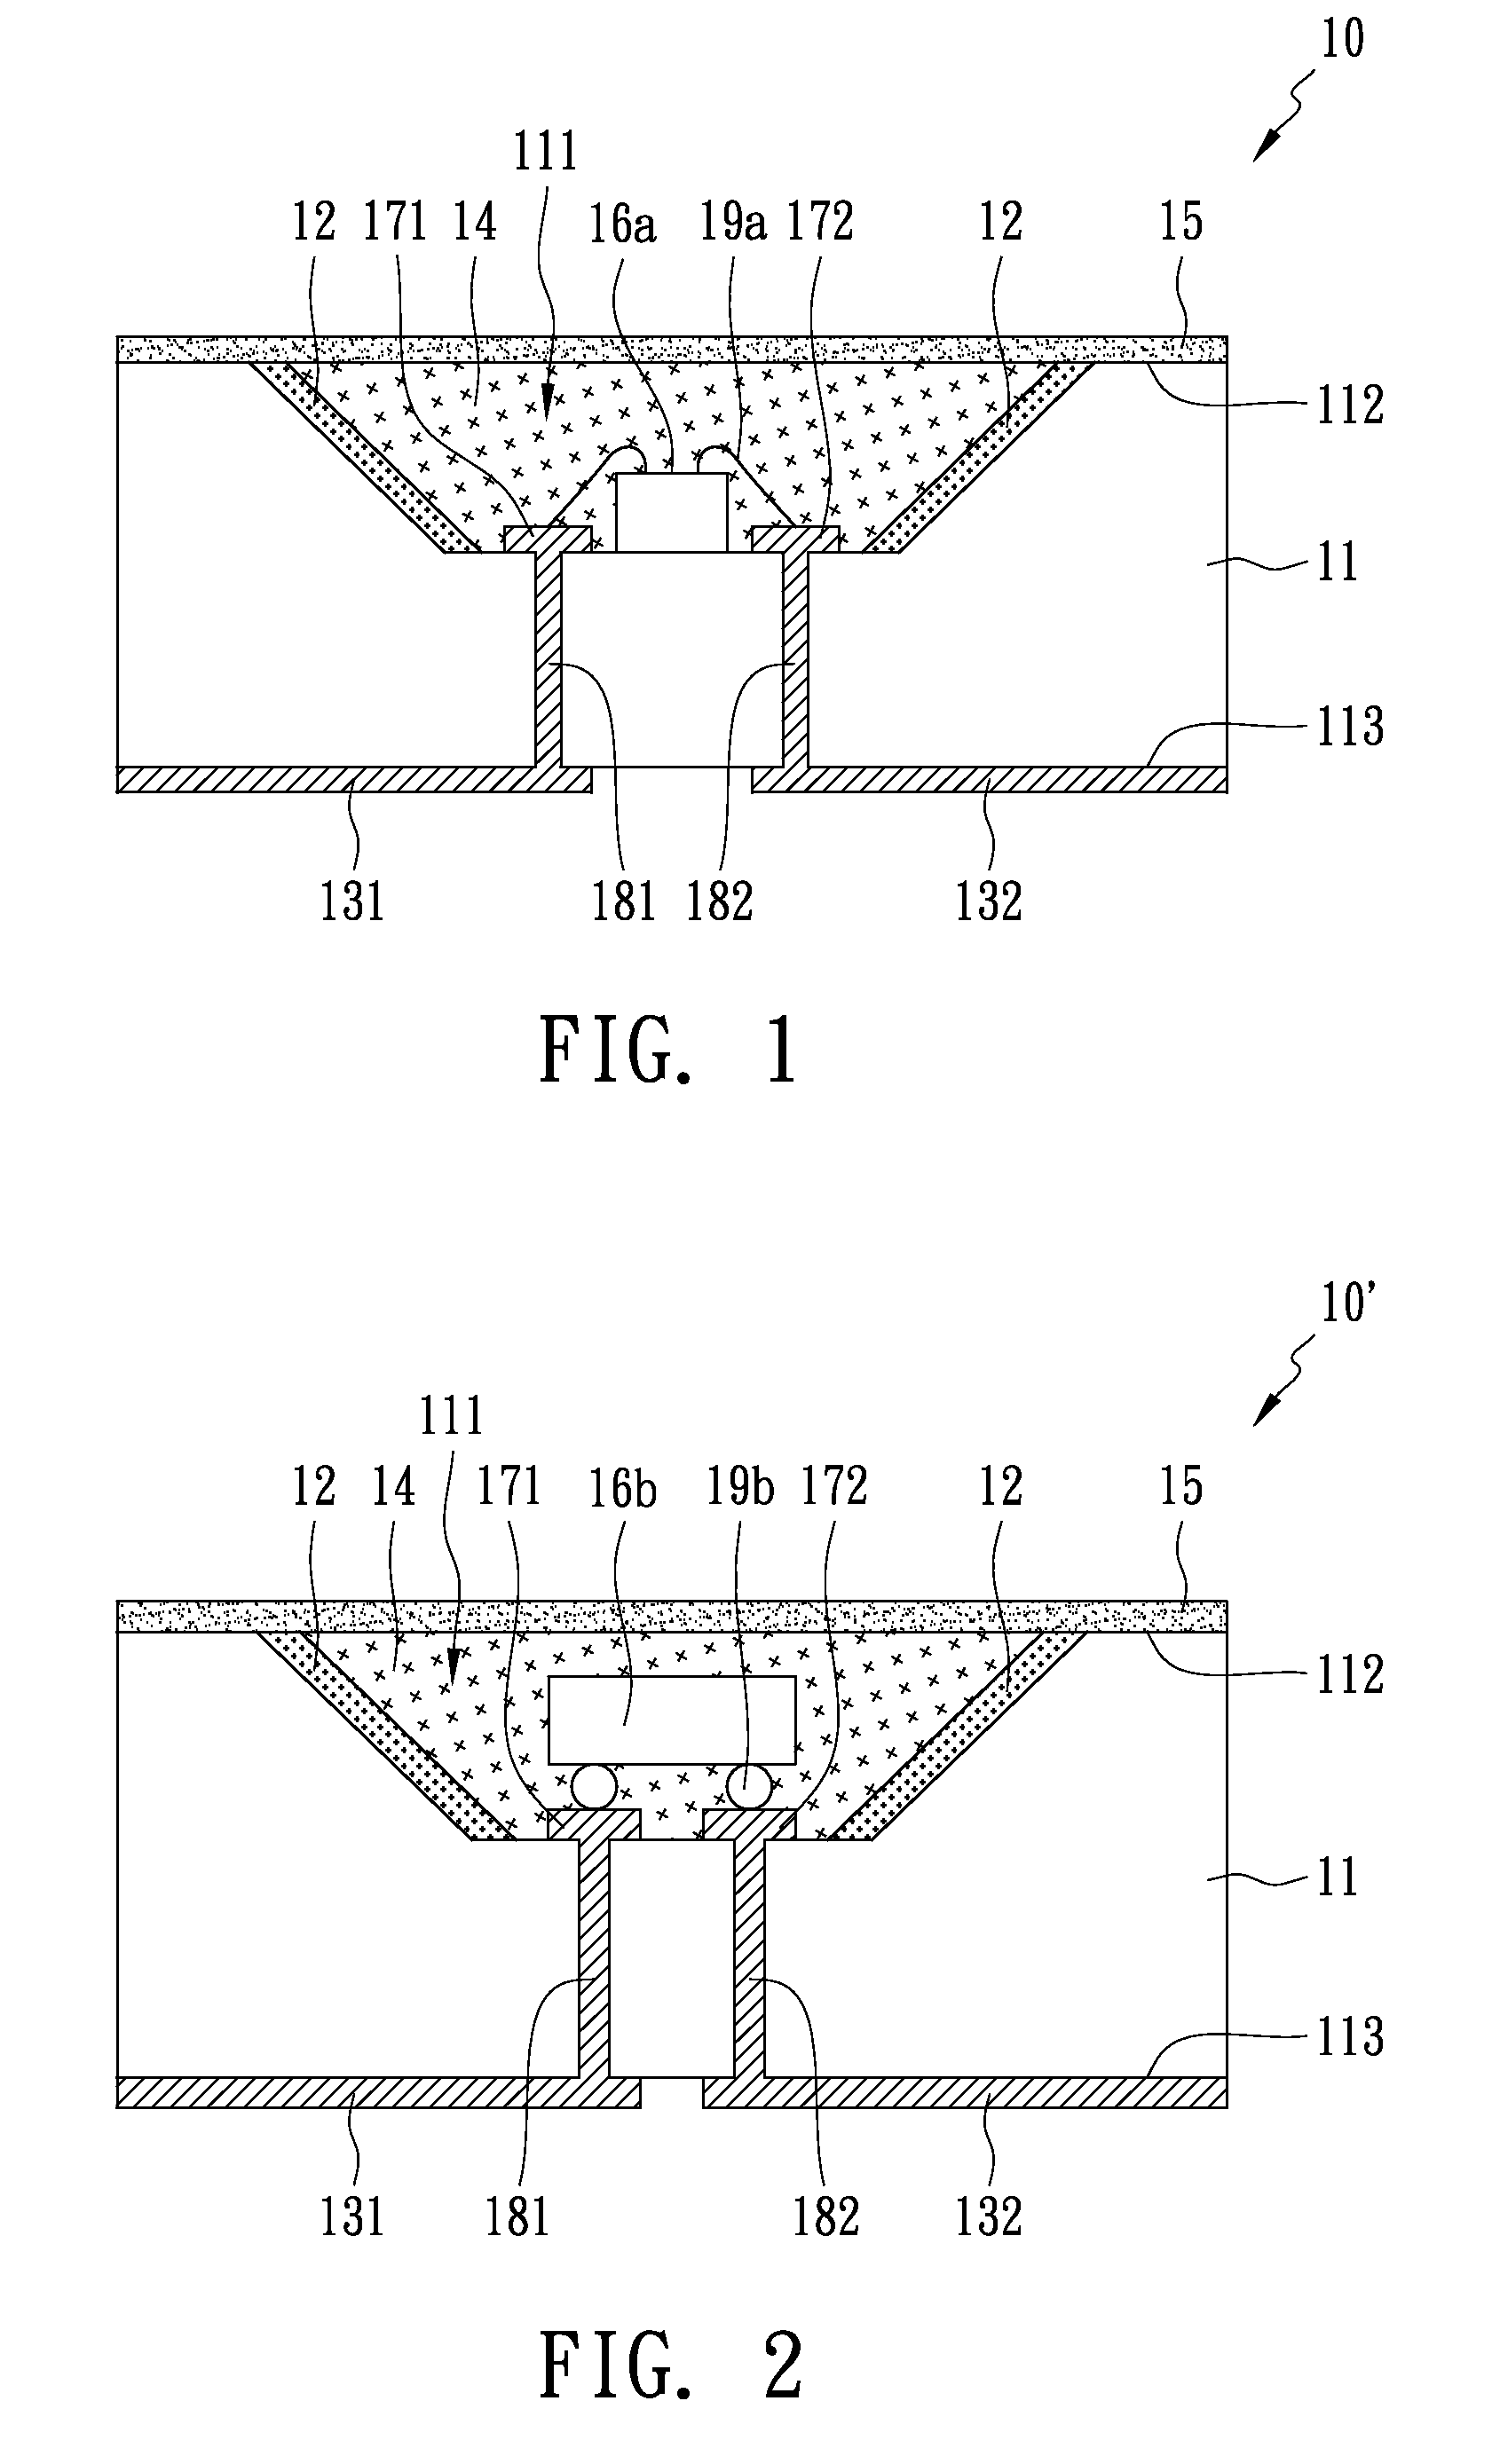 Package structure of a light emitting diode device and method of fabricating the same